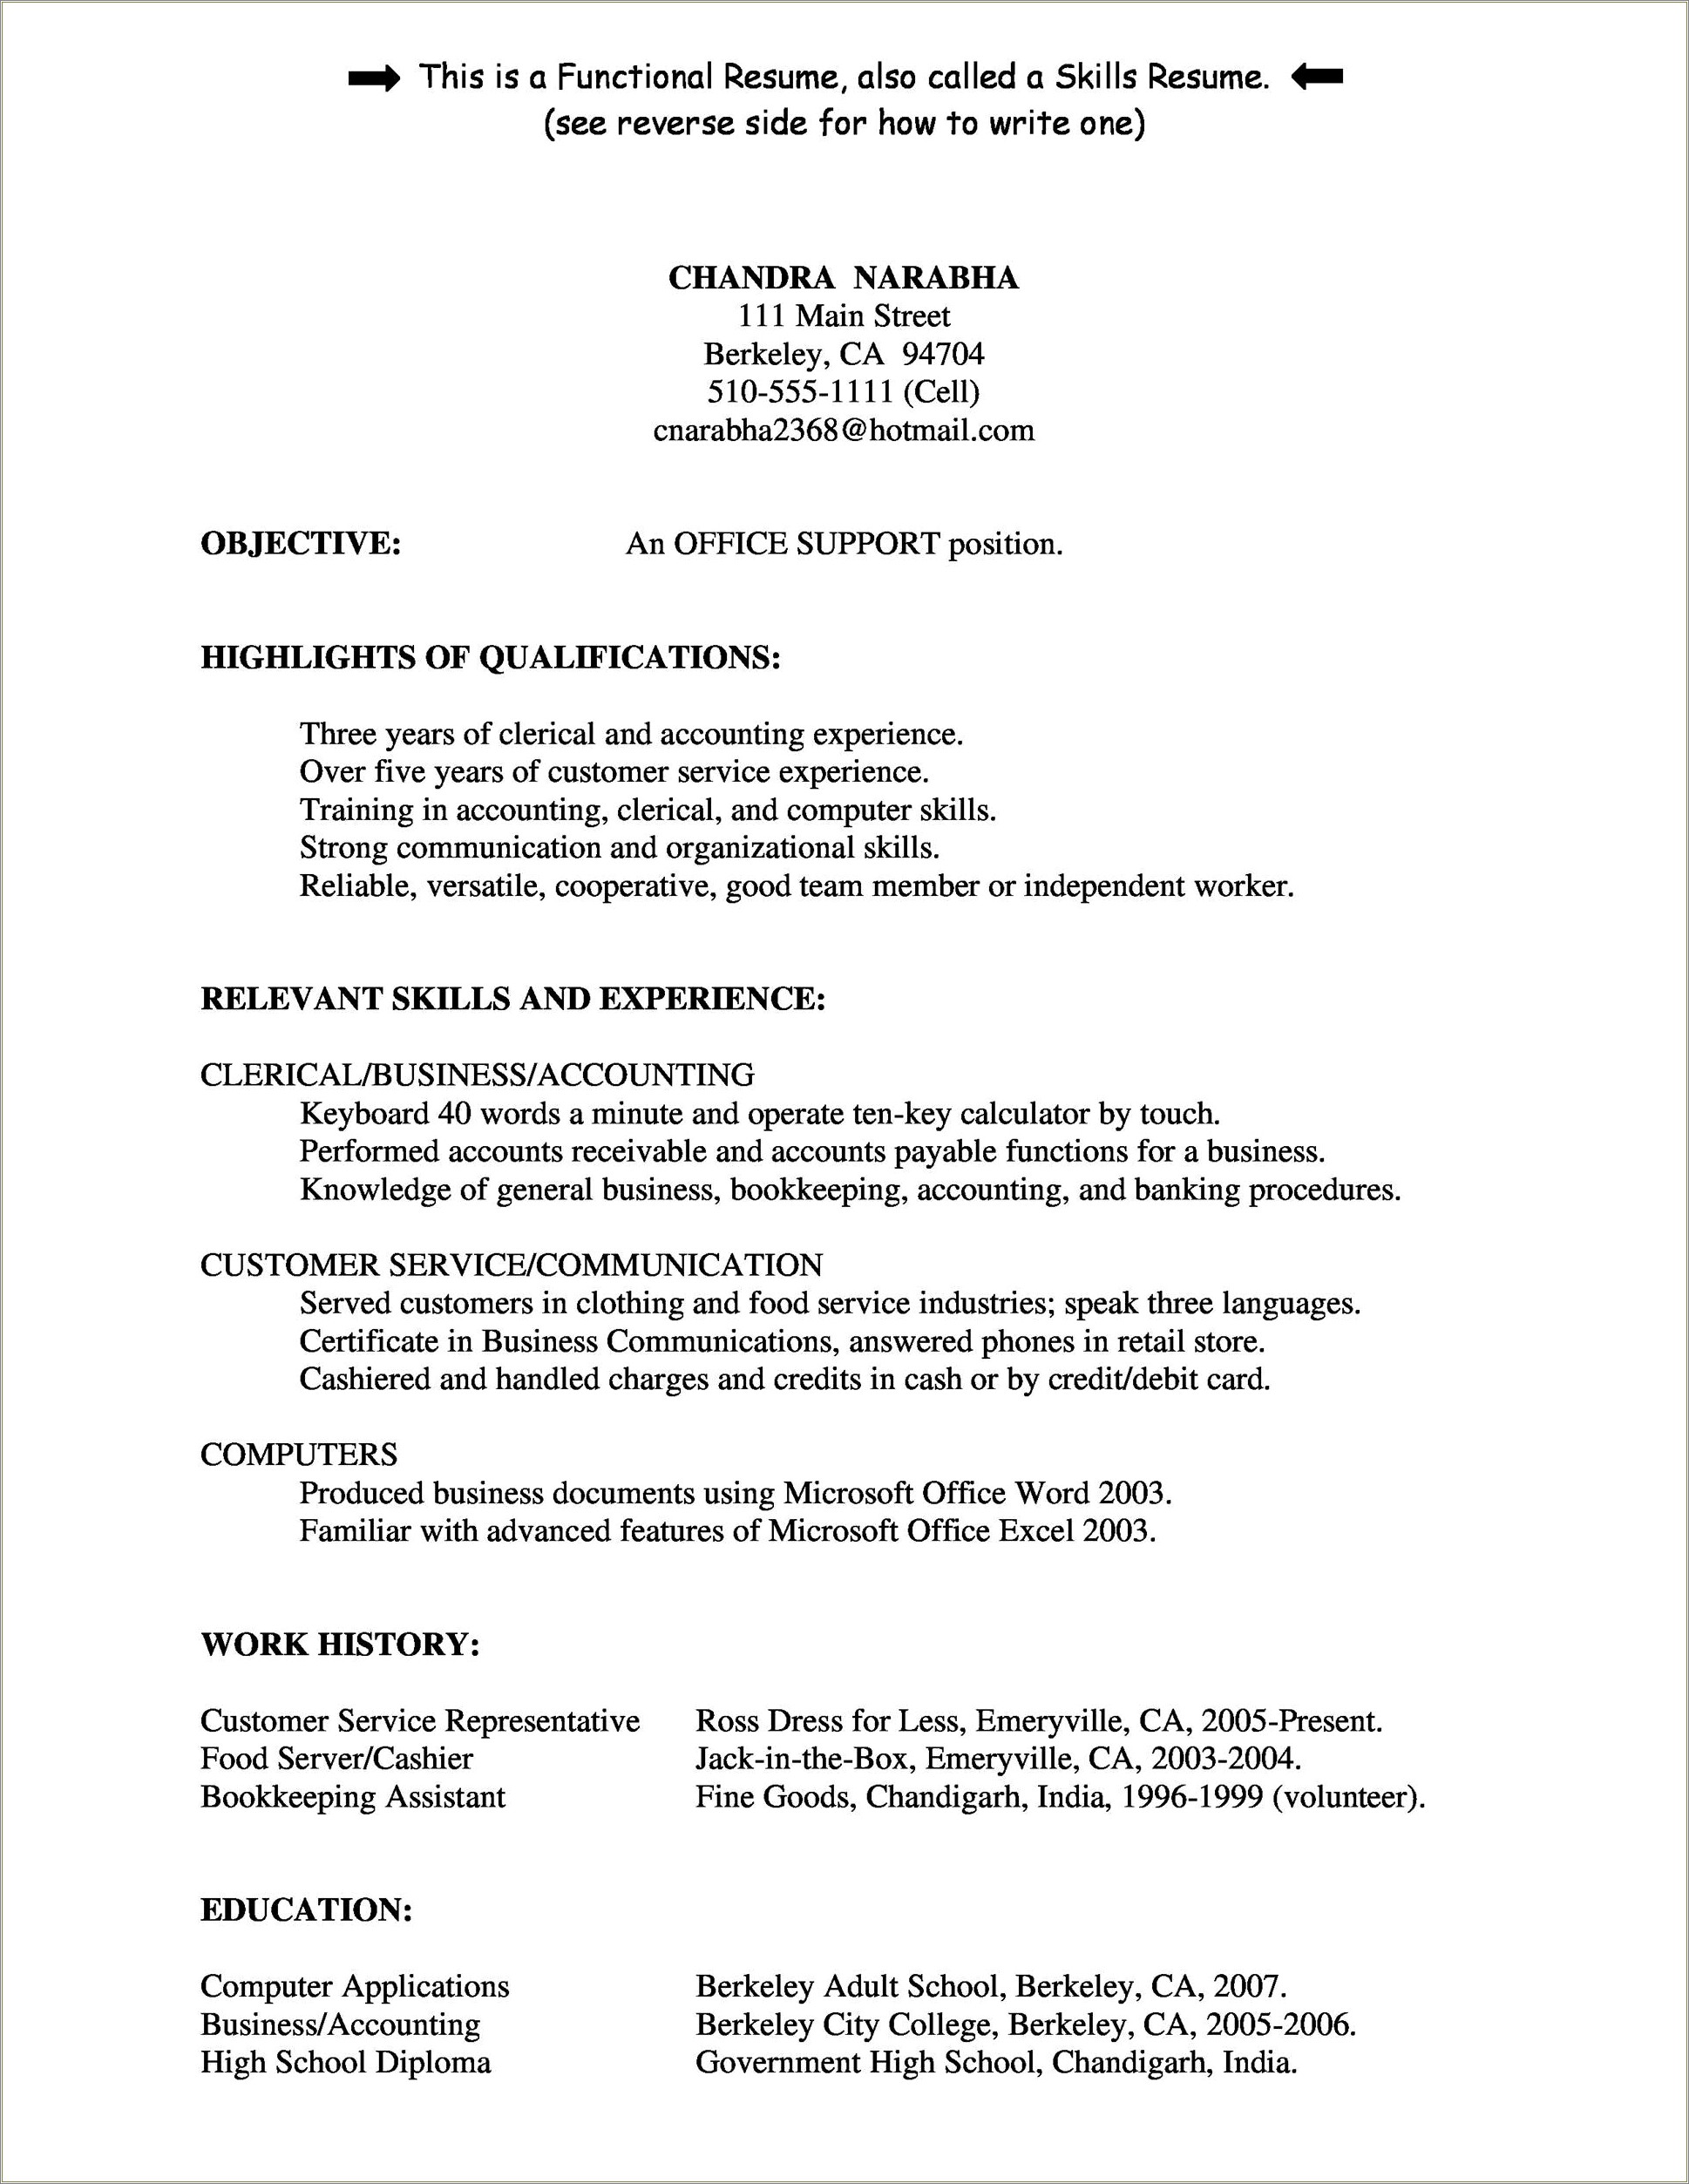 Free Resume Template For Customer Service Clerical